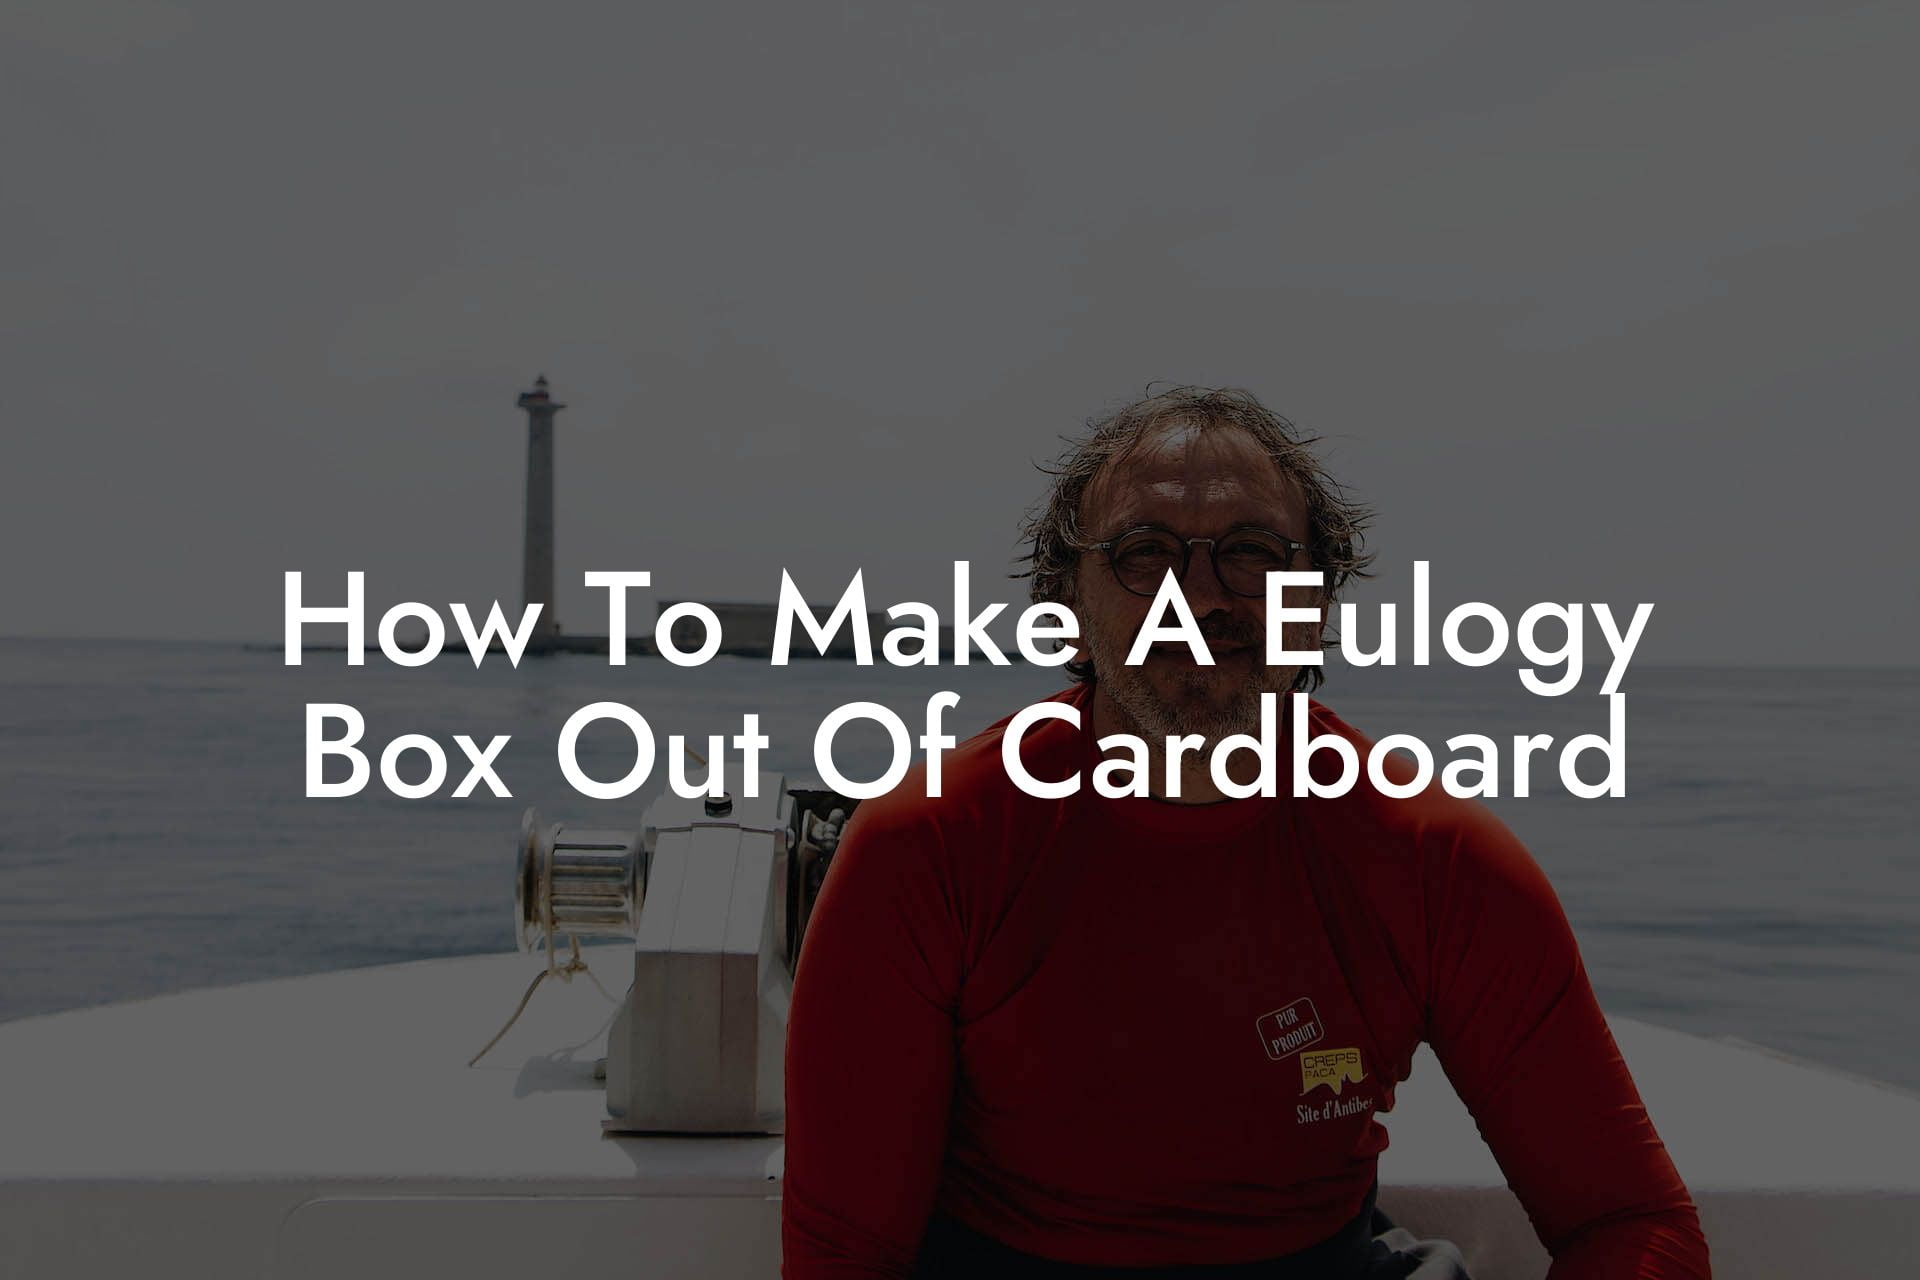 How To Make A Eulogy Box Out Of Cardboard